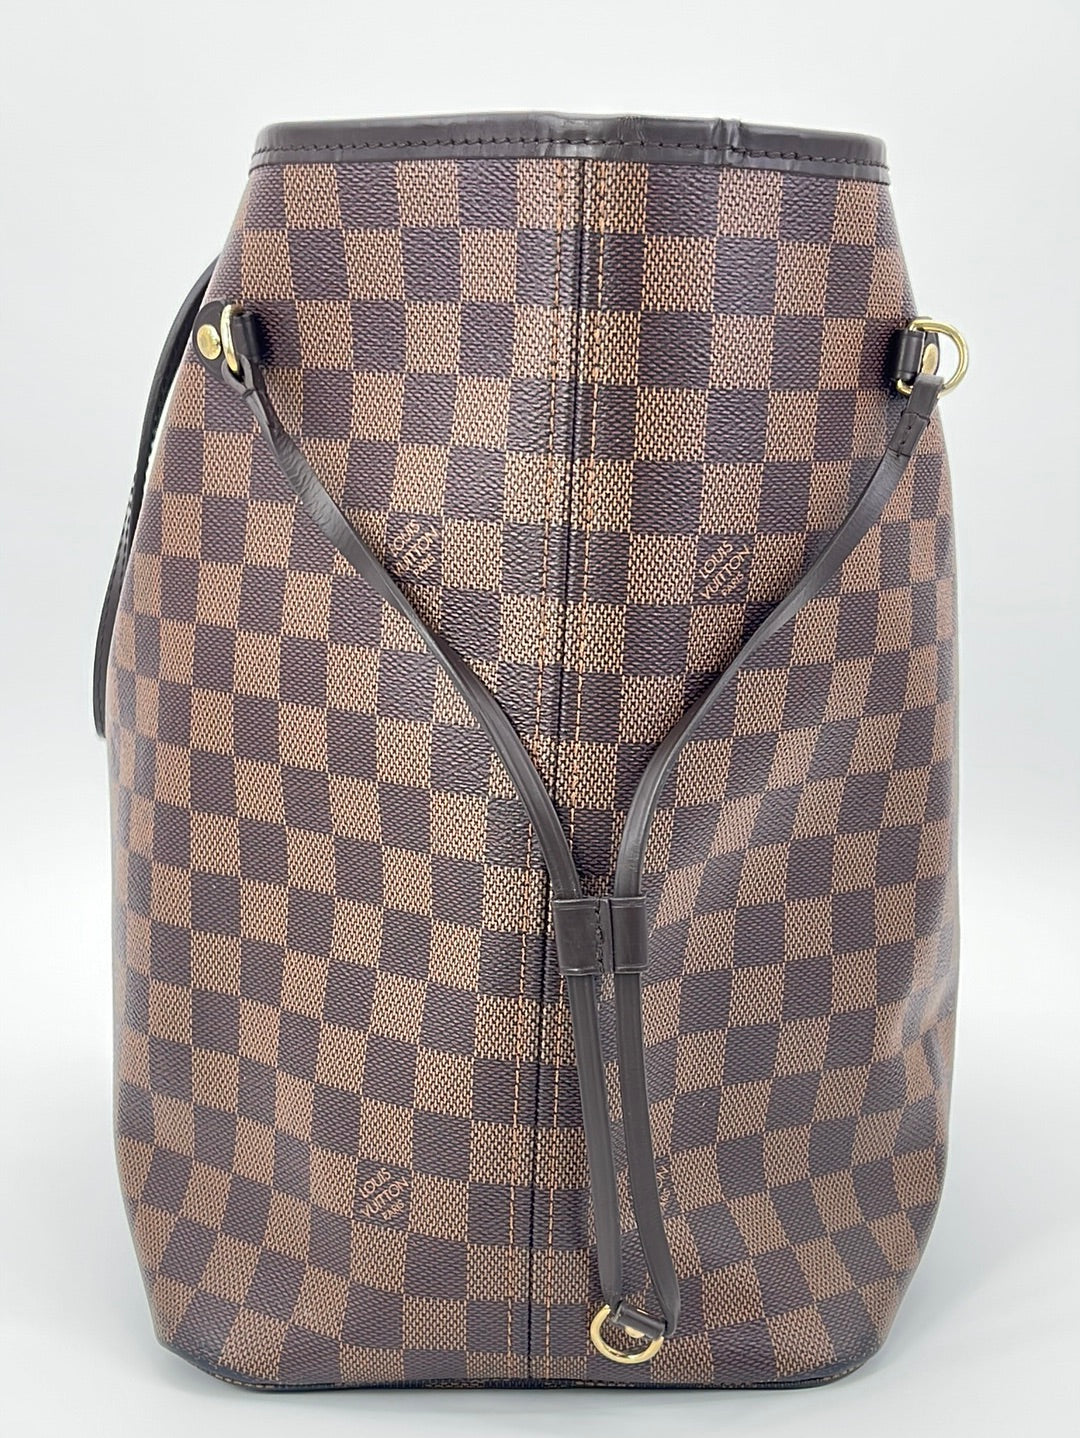 PRELOVED Louis Vuitton Damier Ebene Neverfull GM Tote Bag Y6DT8W8 040823 - $300 OFF LIVE SHOW SALE